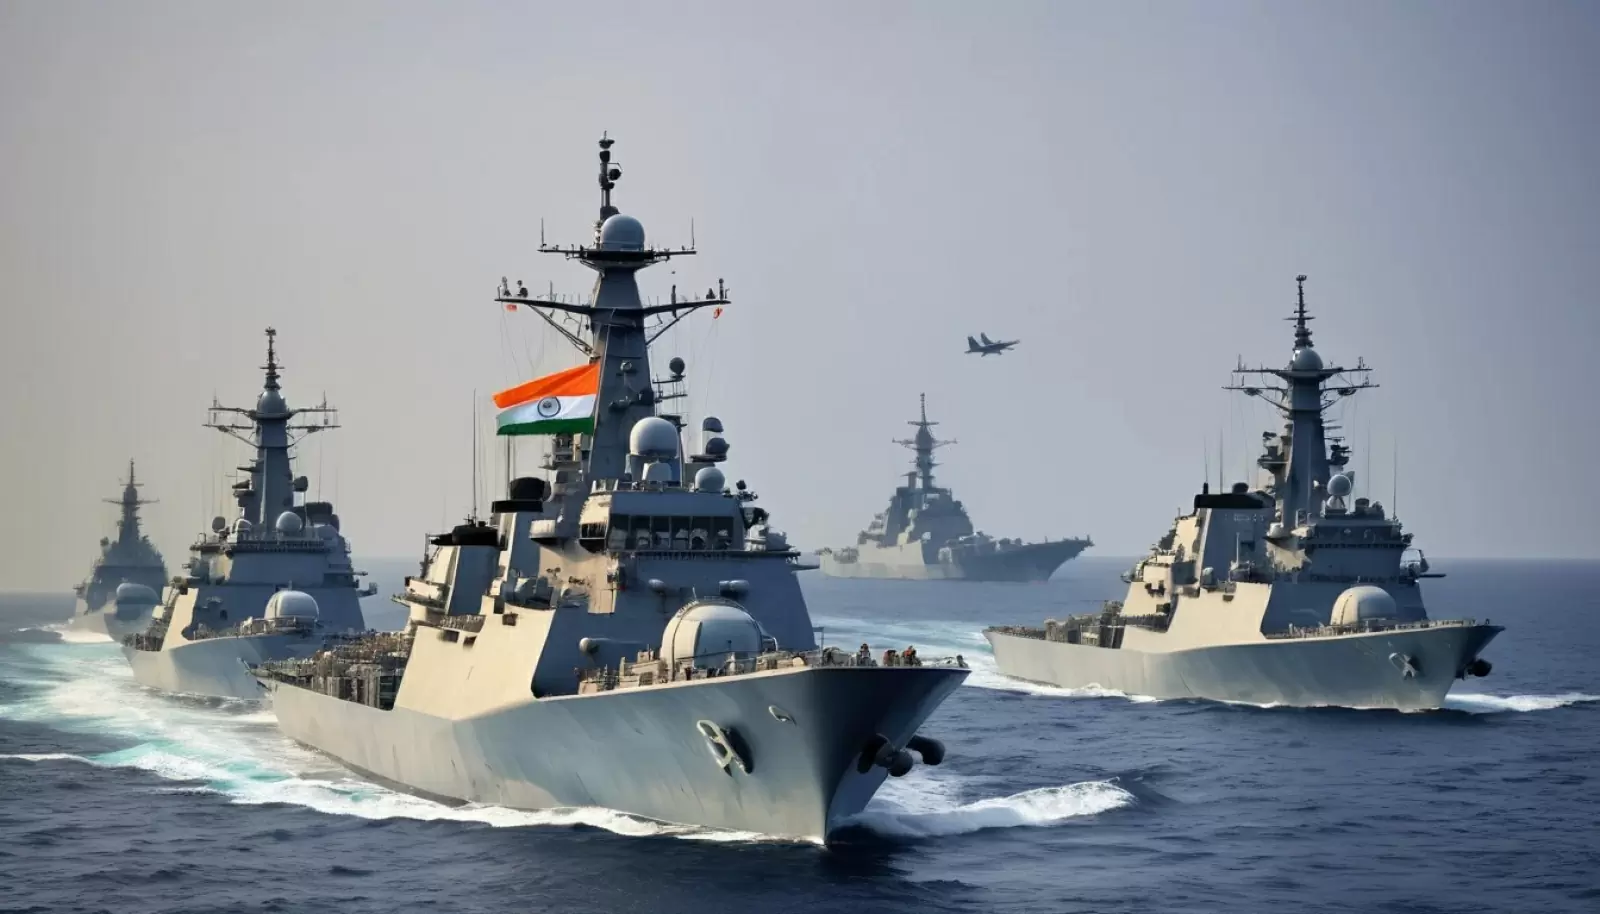 India is becoming a superpower, and the Indian Navy's assistance is being praised worldwide